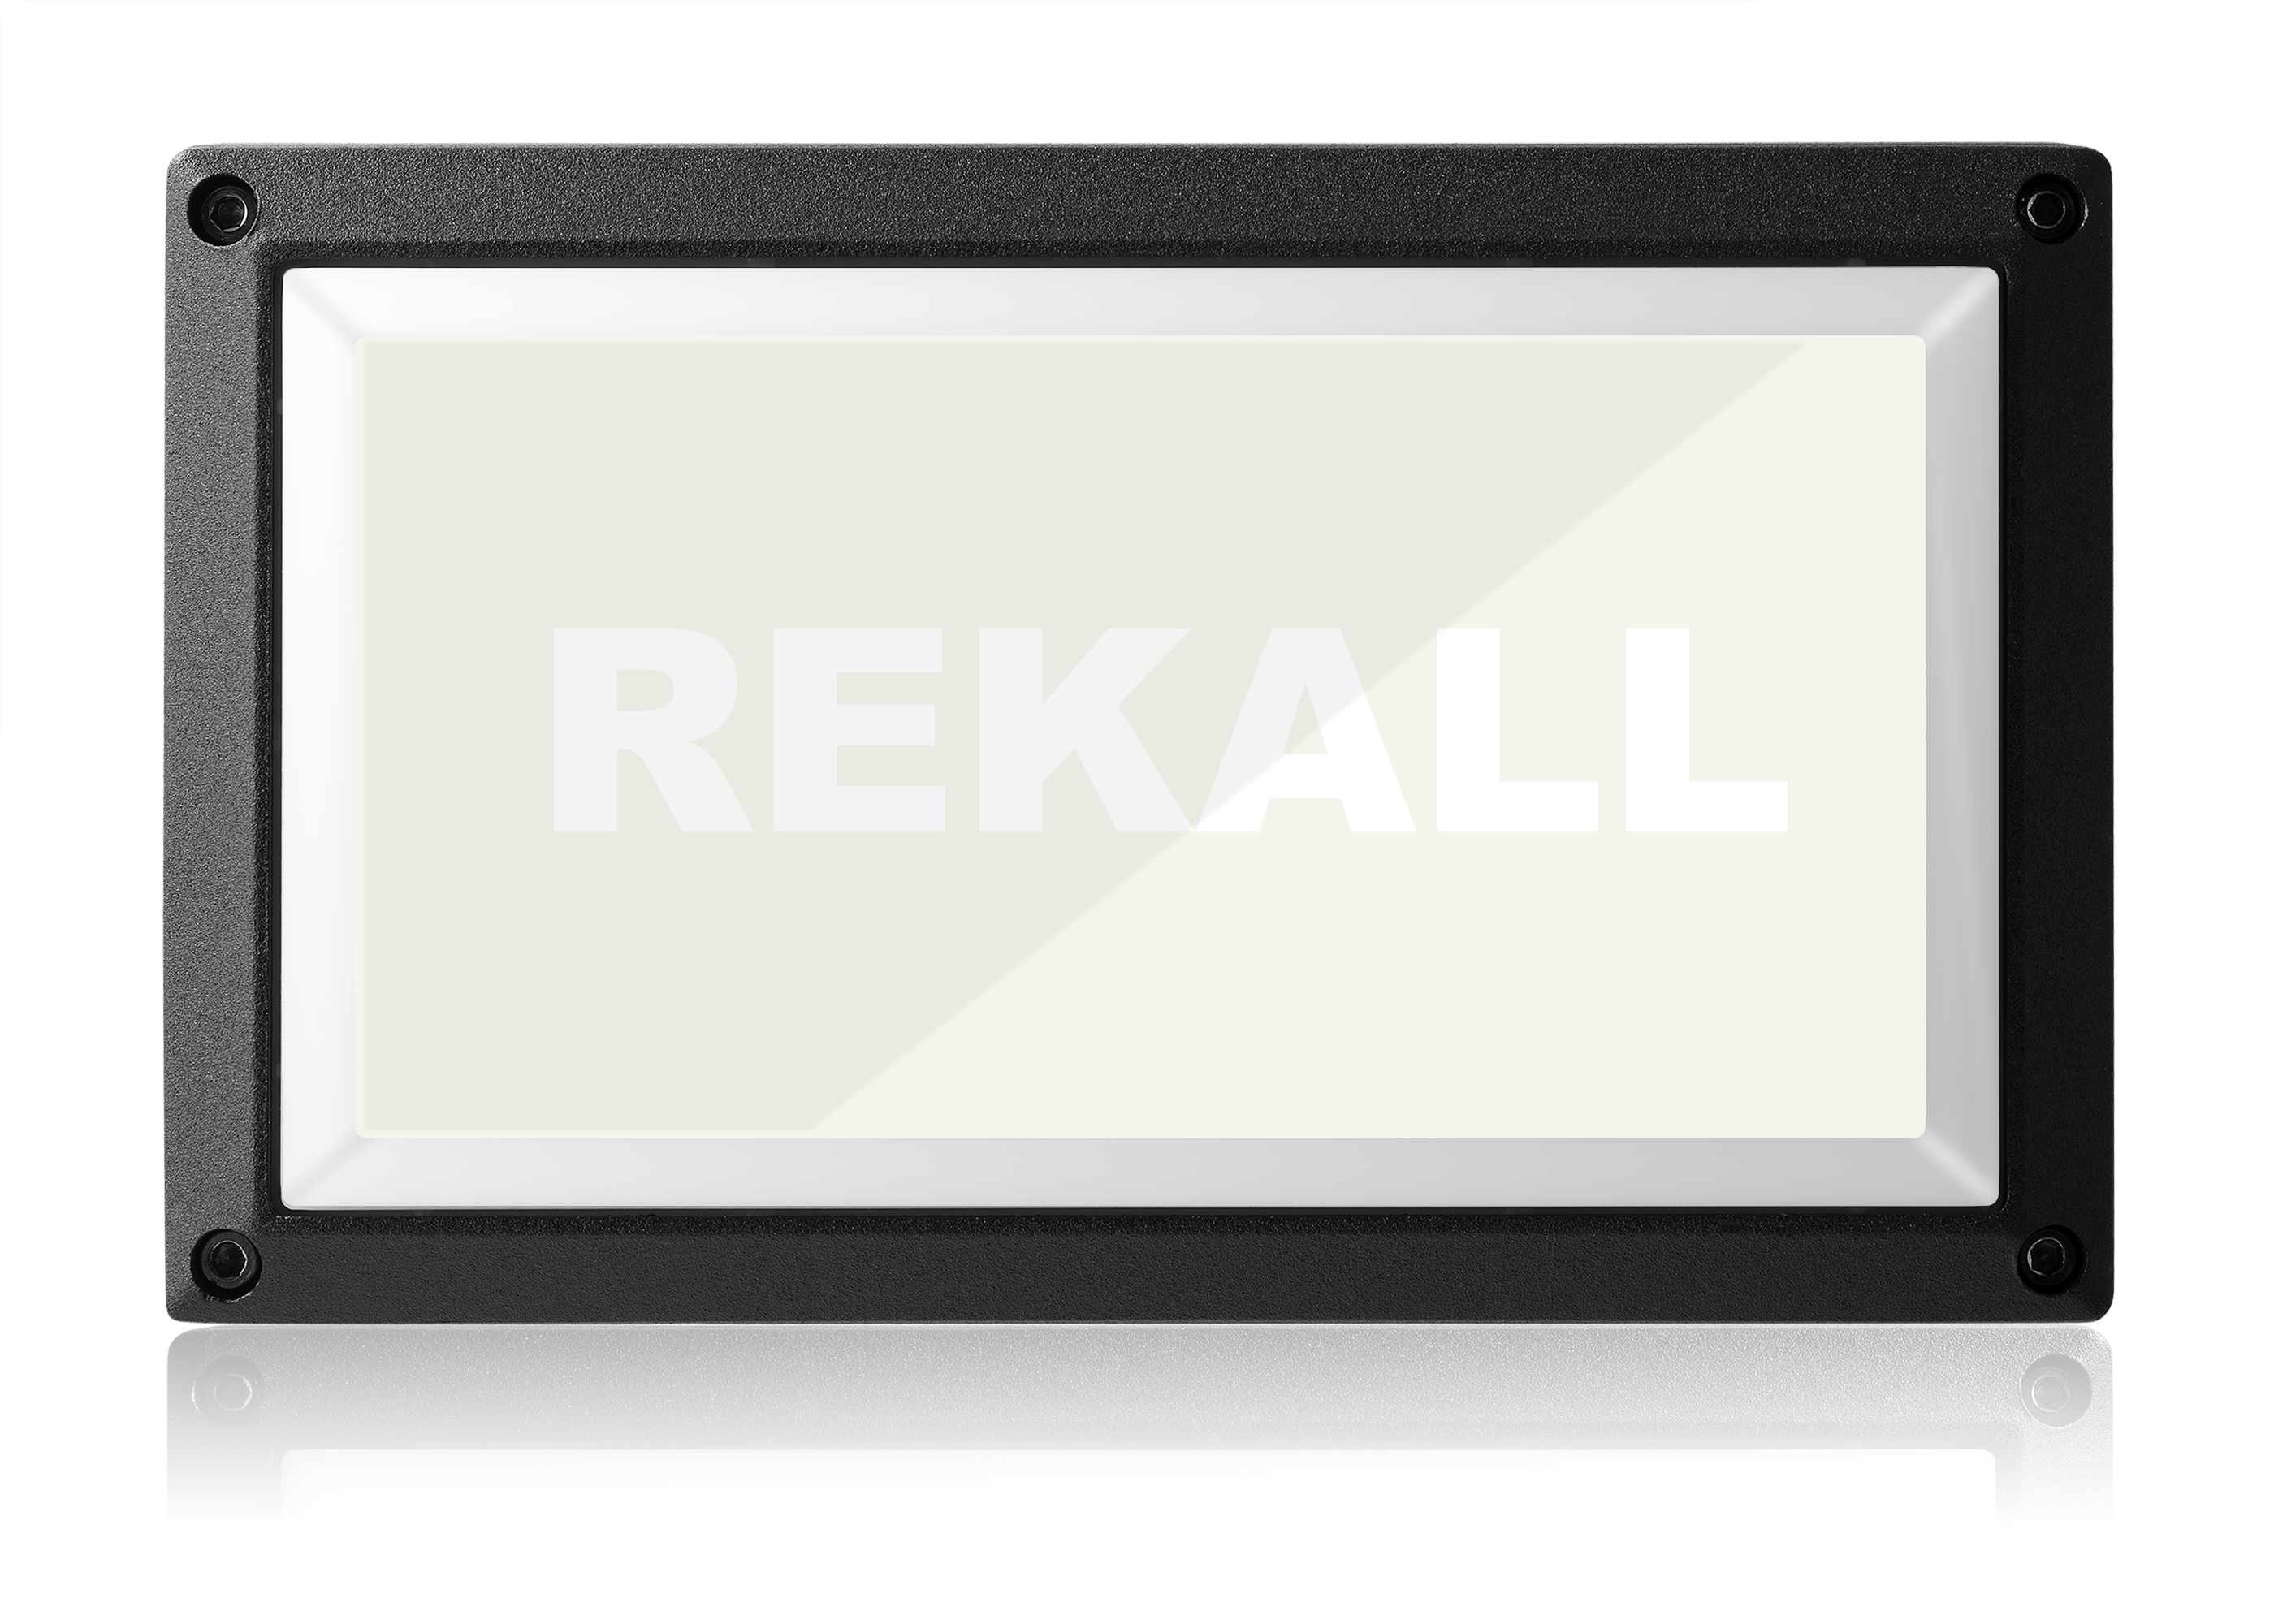 Unclassified Discussion Light - Rekall Dynamics LED Sign-